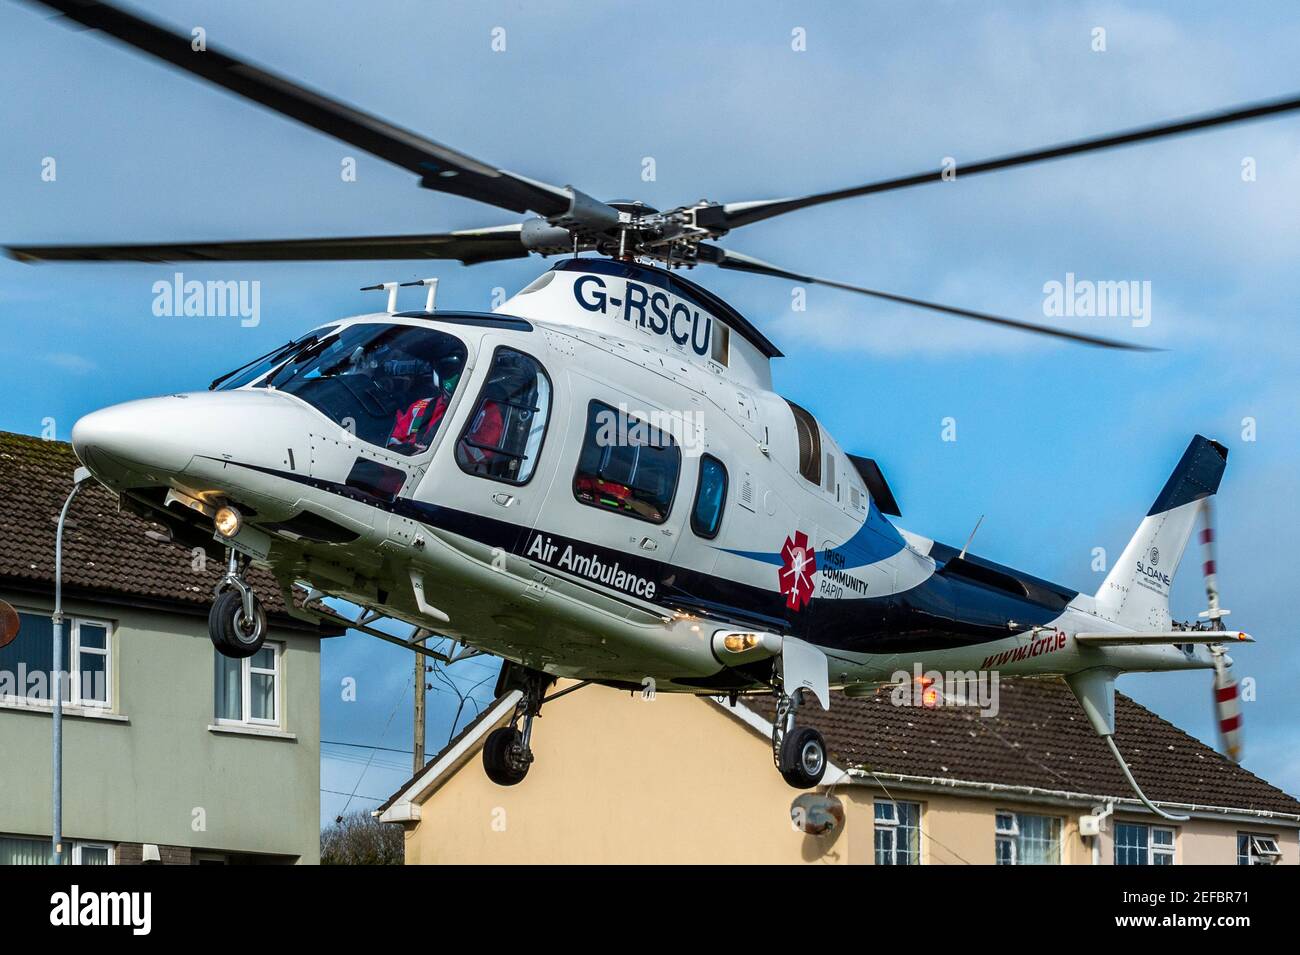 Timoleague, West Cork, Ireland. 17th Feb, 2021. The Air Ambulance landed in a Timoleague housing estate this morning to a patient who had a heart attack. Sadly, the patient passed away so was not transported to hospital. Credit: AG News/Alamy Live News Stock Photo